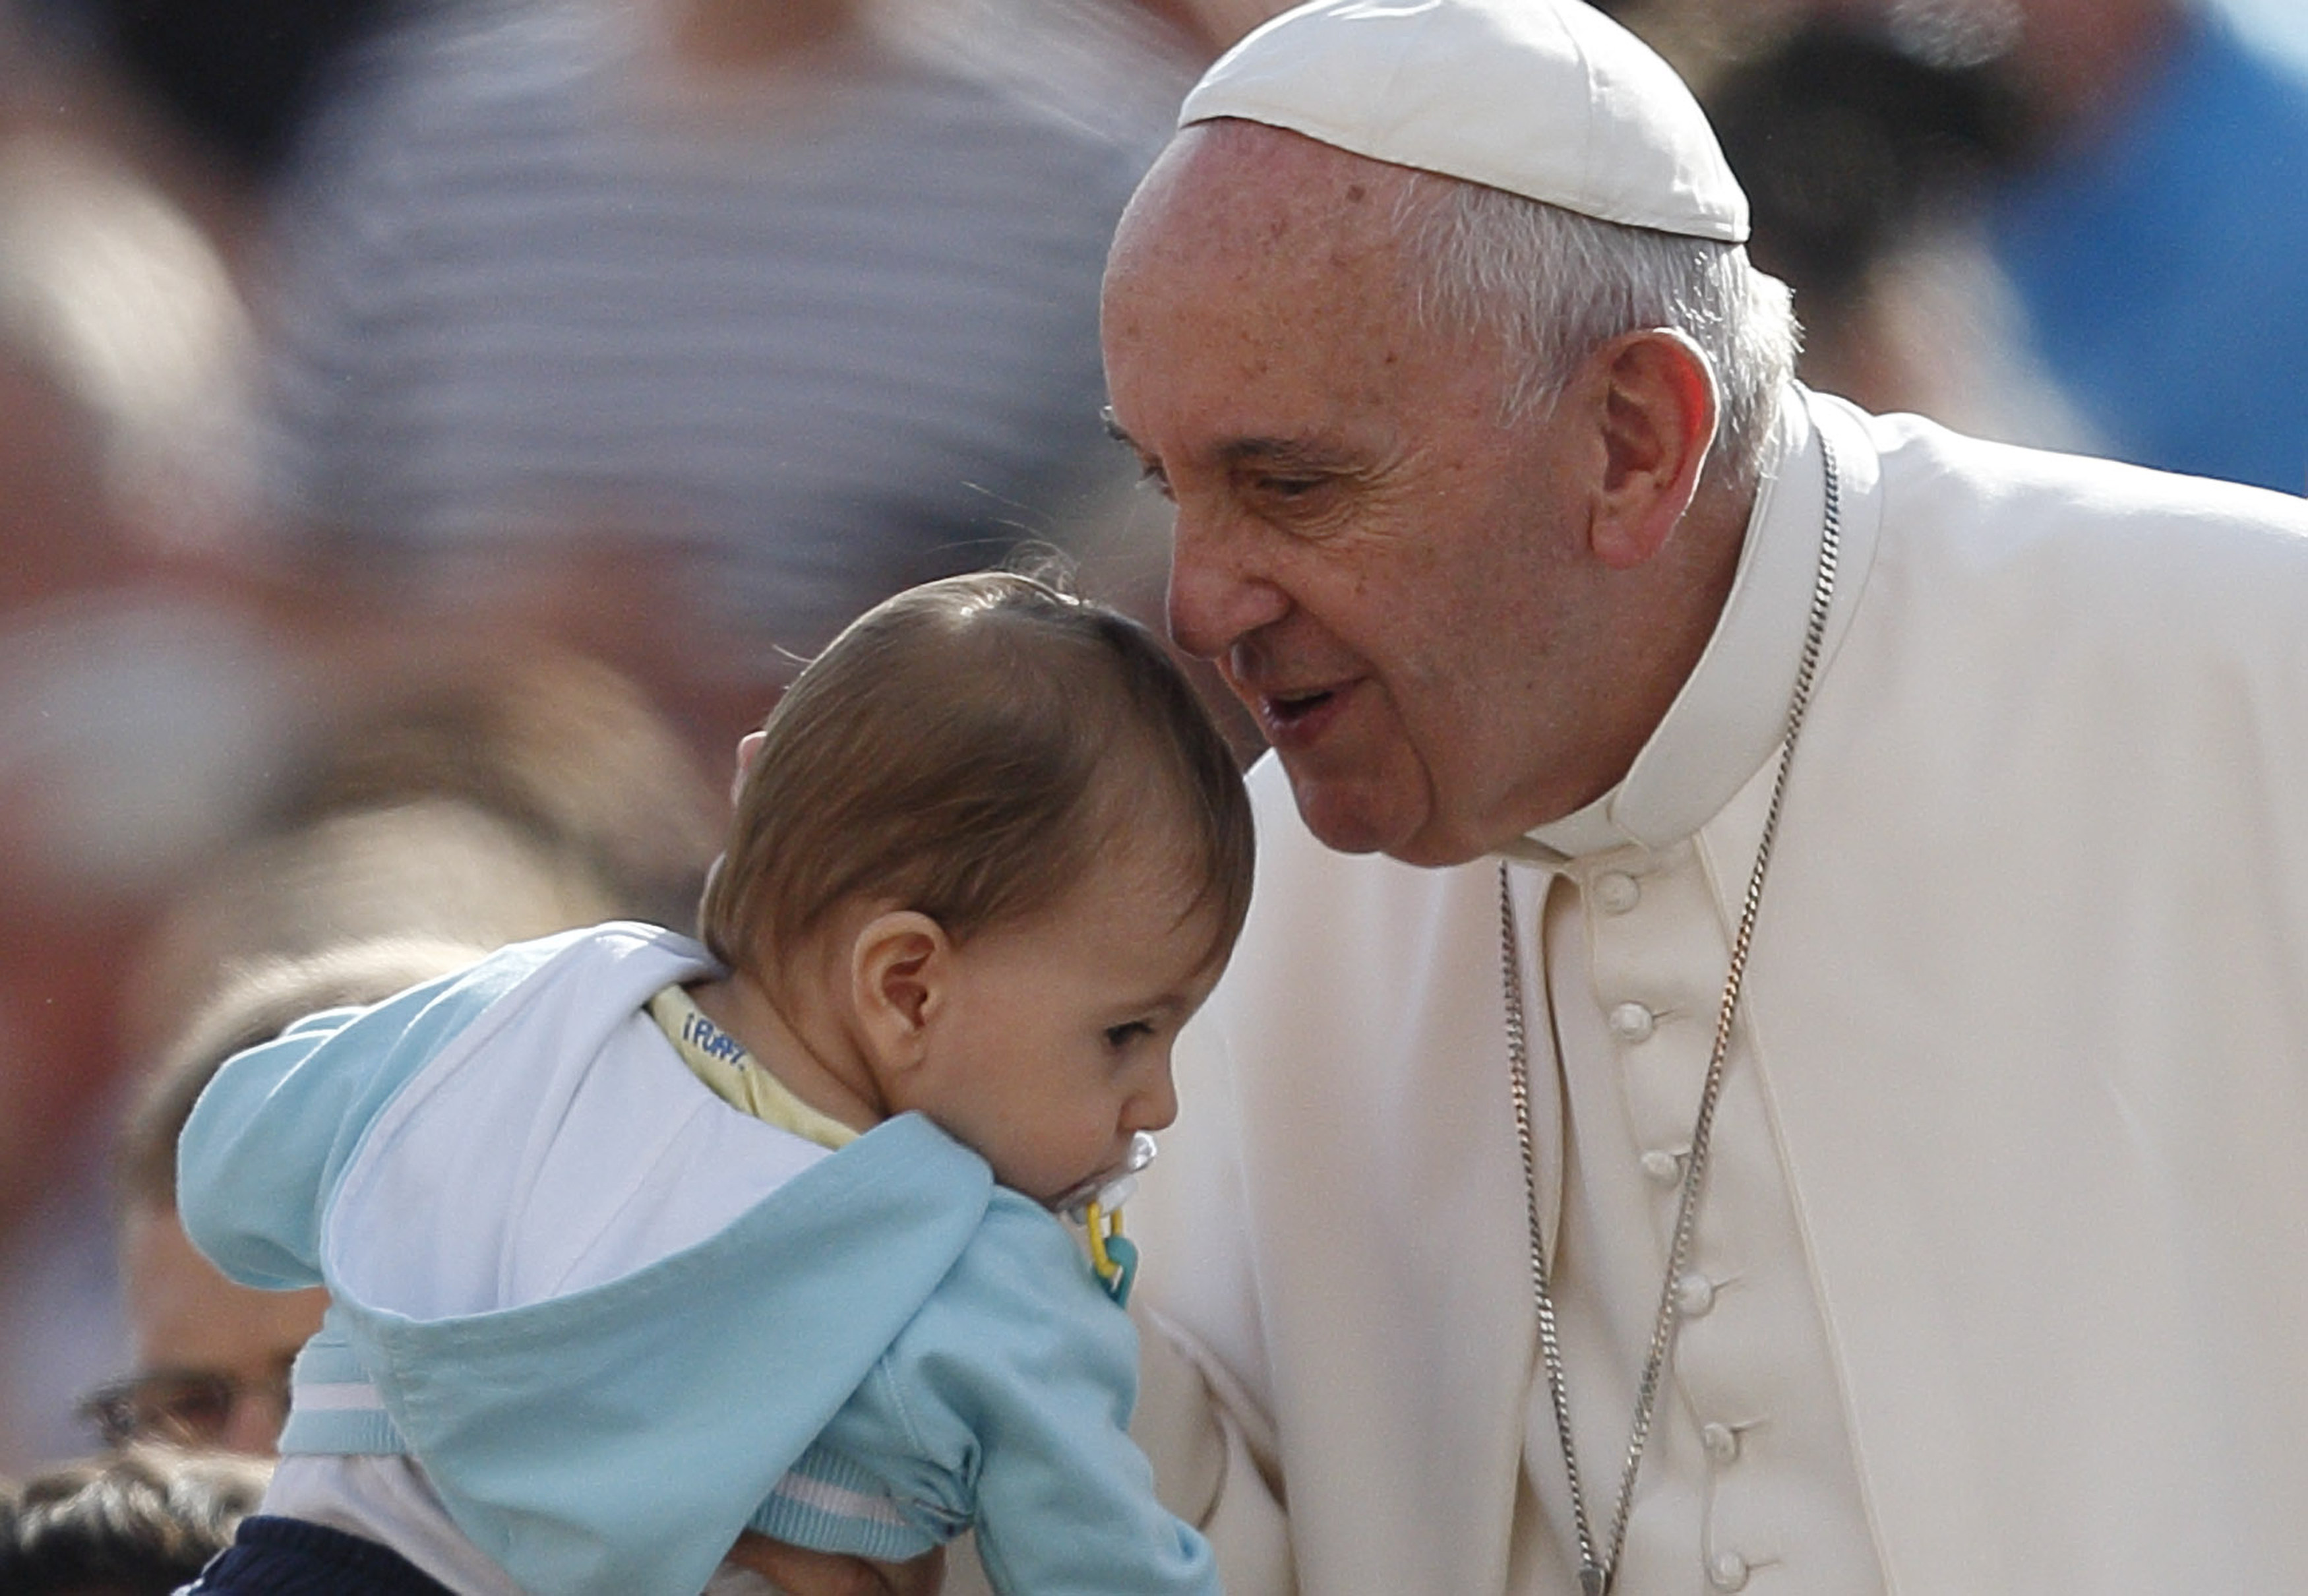 Pope Francis greets a baby during his general audience in St. Peter's Square at the Vatican Oct. 7. The pope said that when families mirror God's love for all, they teach the church how it should relate to all people. (CNS/Paul Haring) 